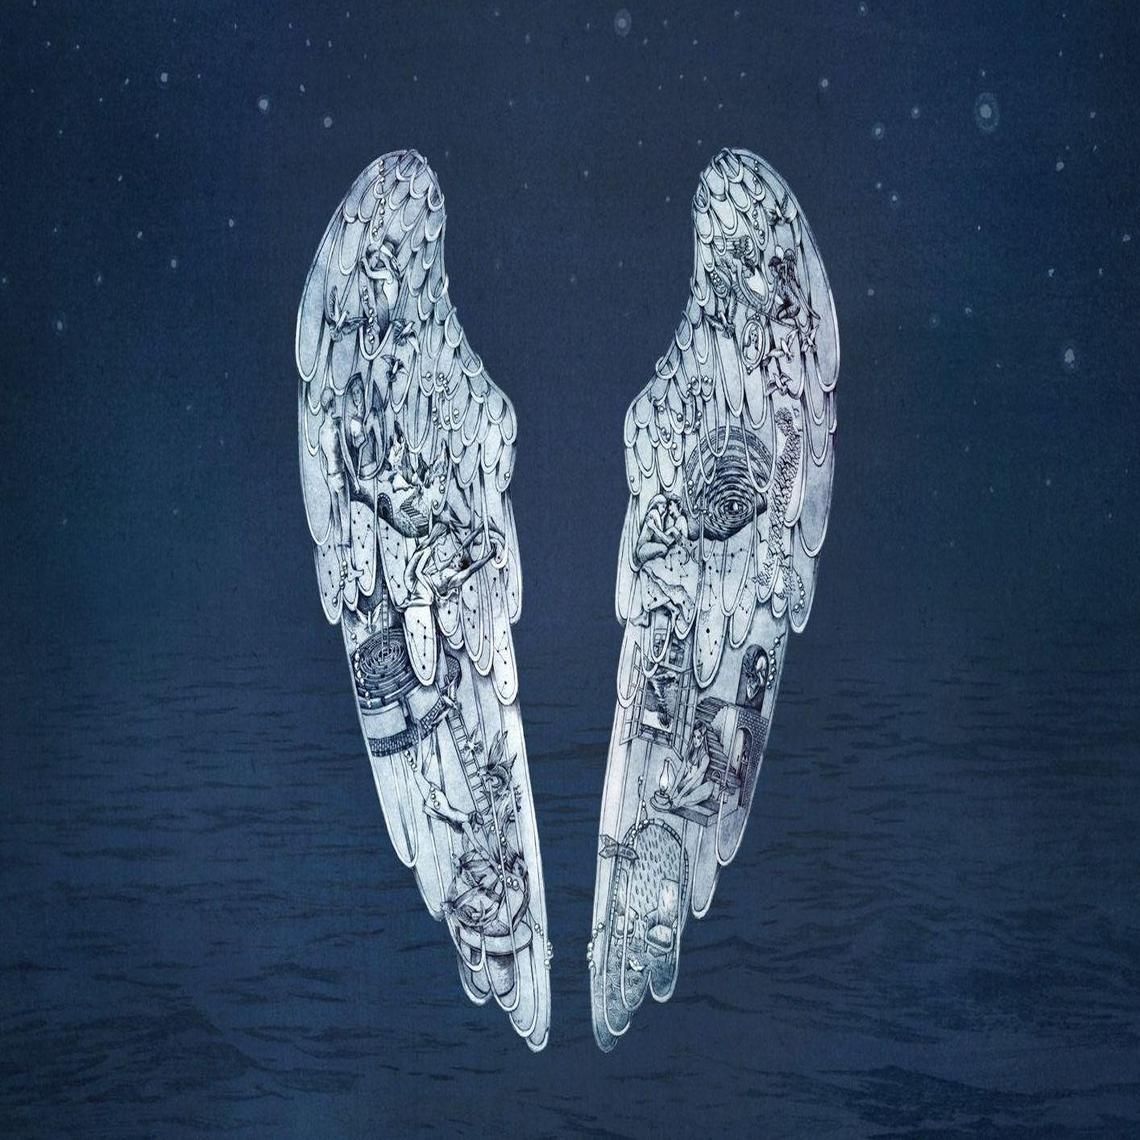 coldplay ghost stories wallpaper